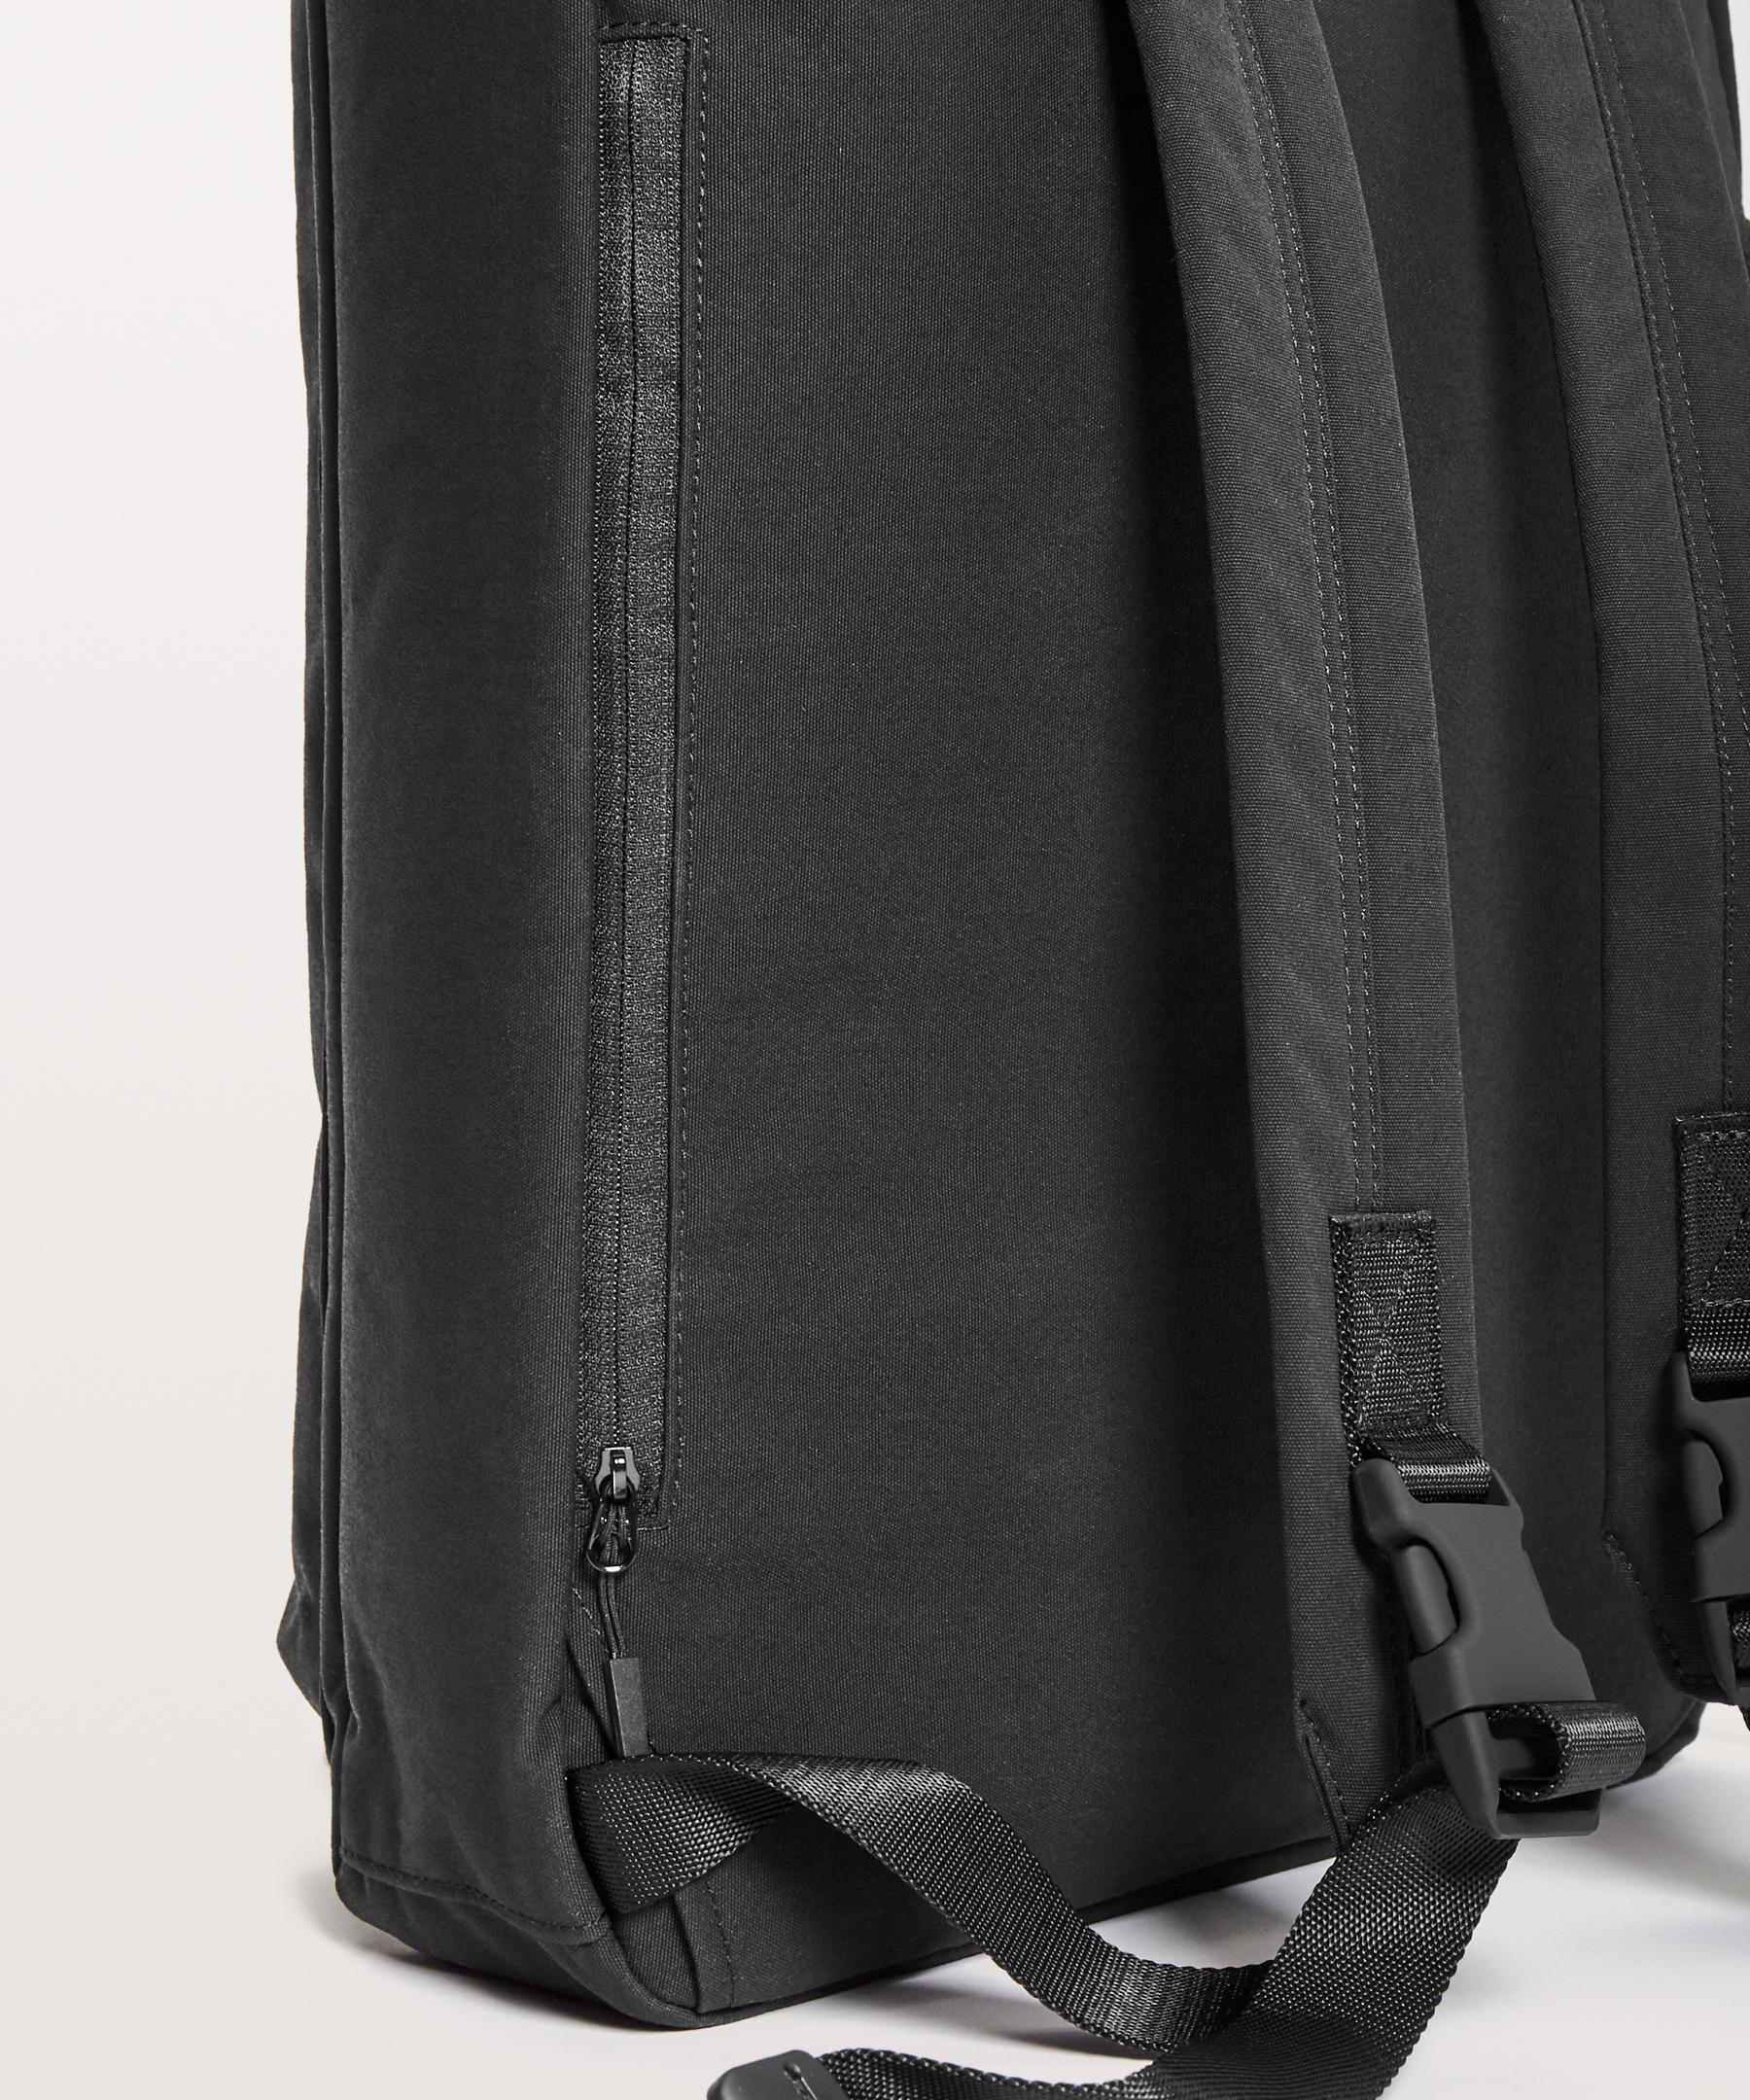 lululemon command the day commute bag